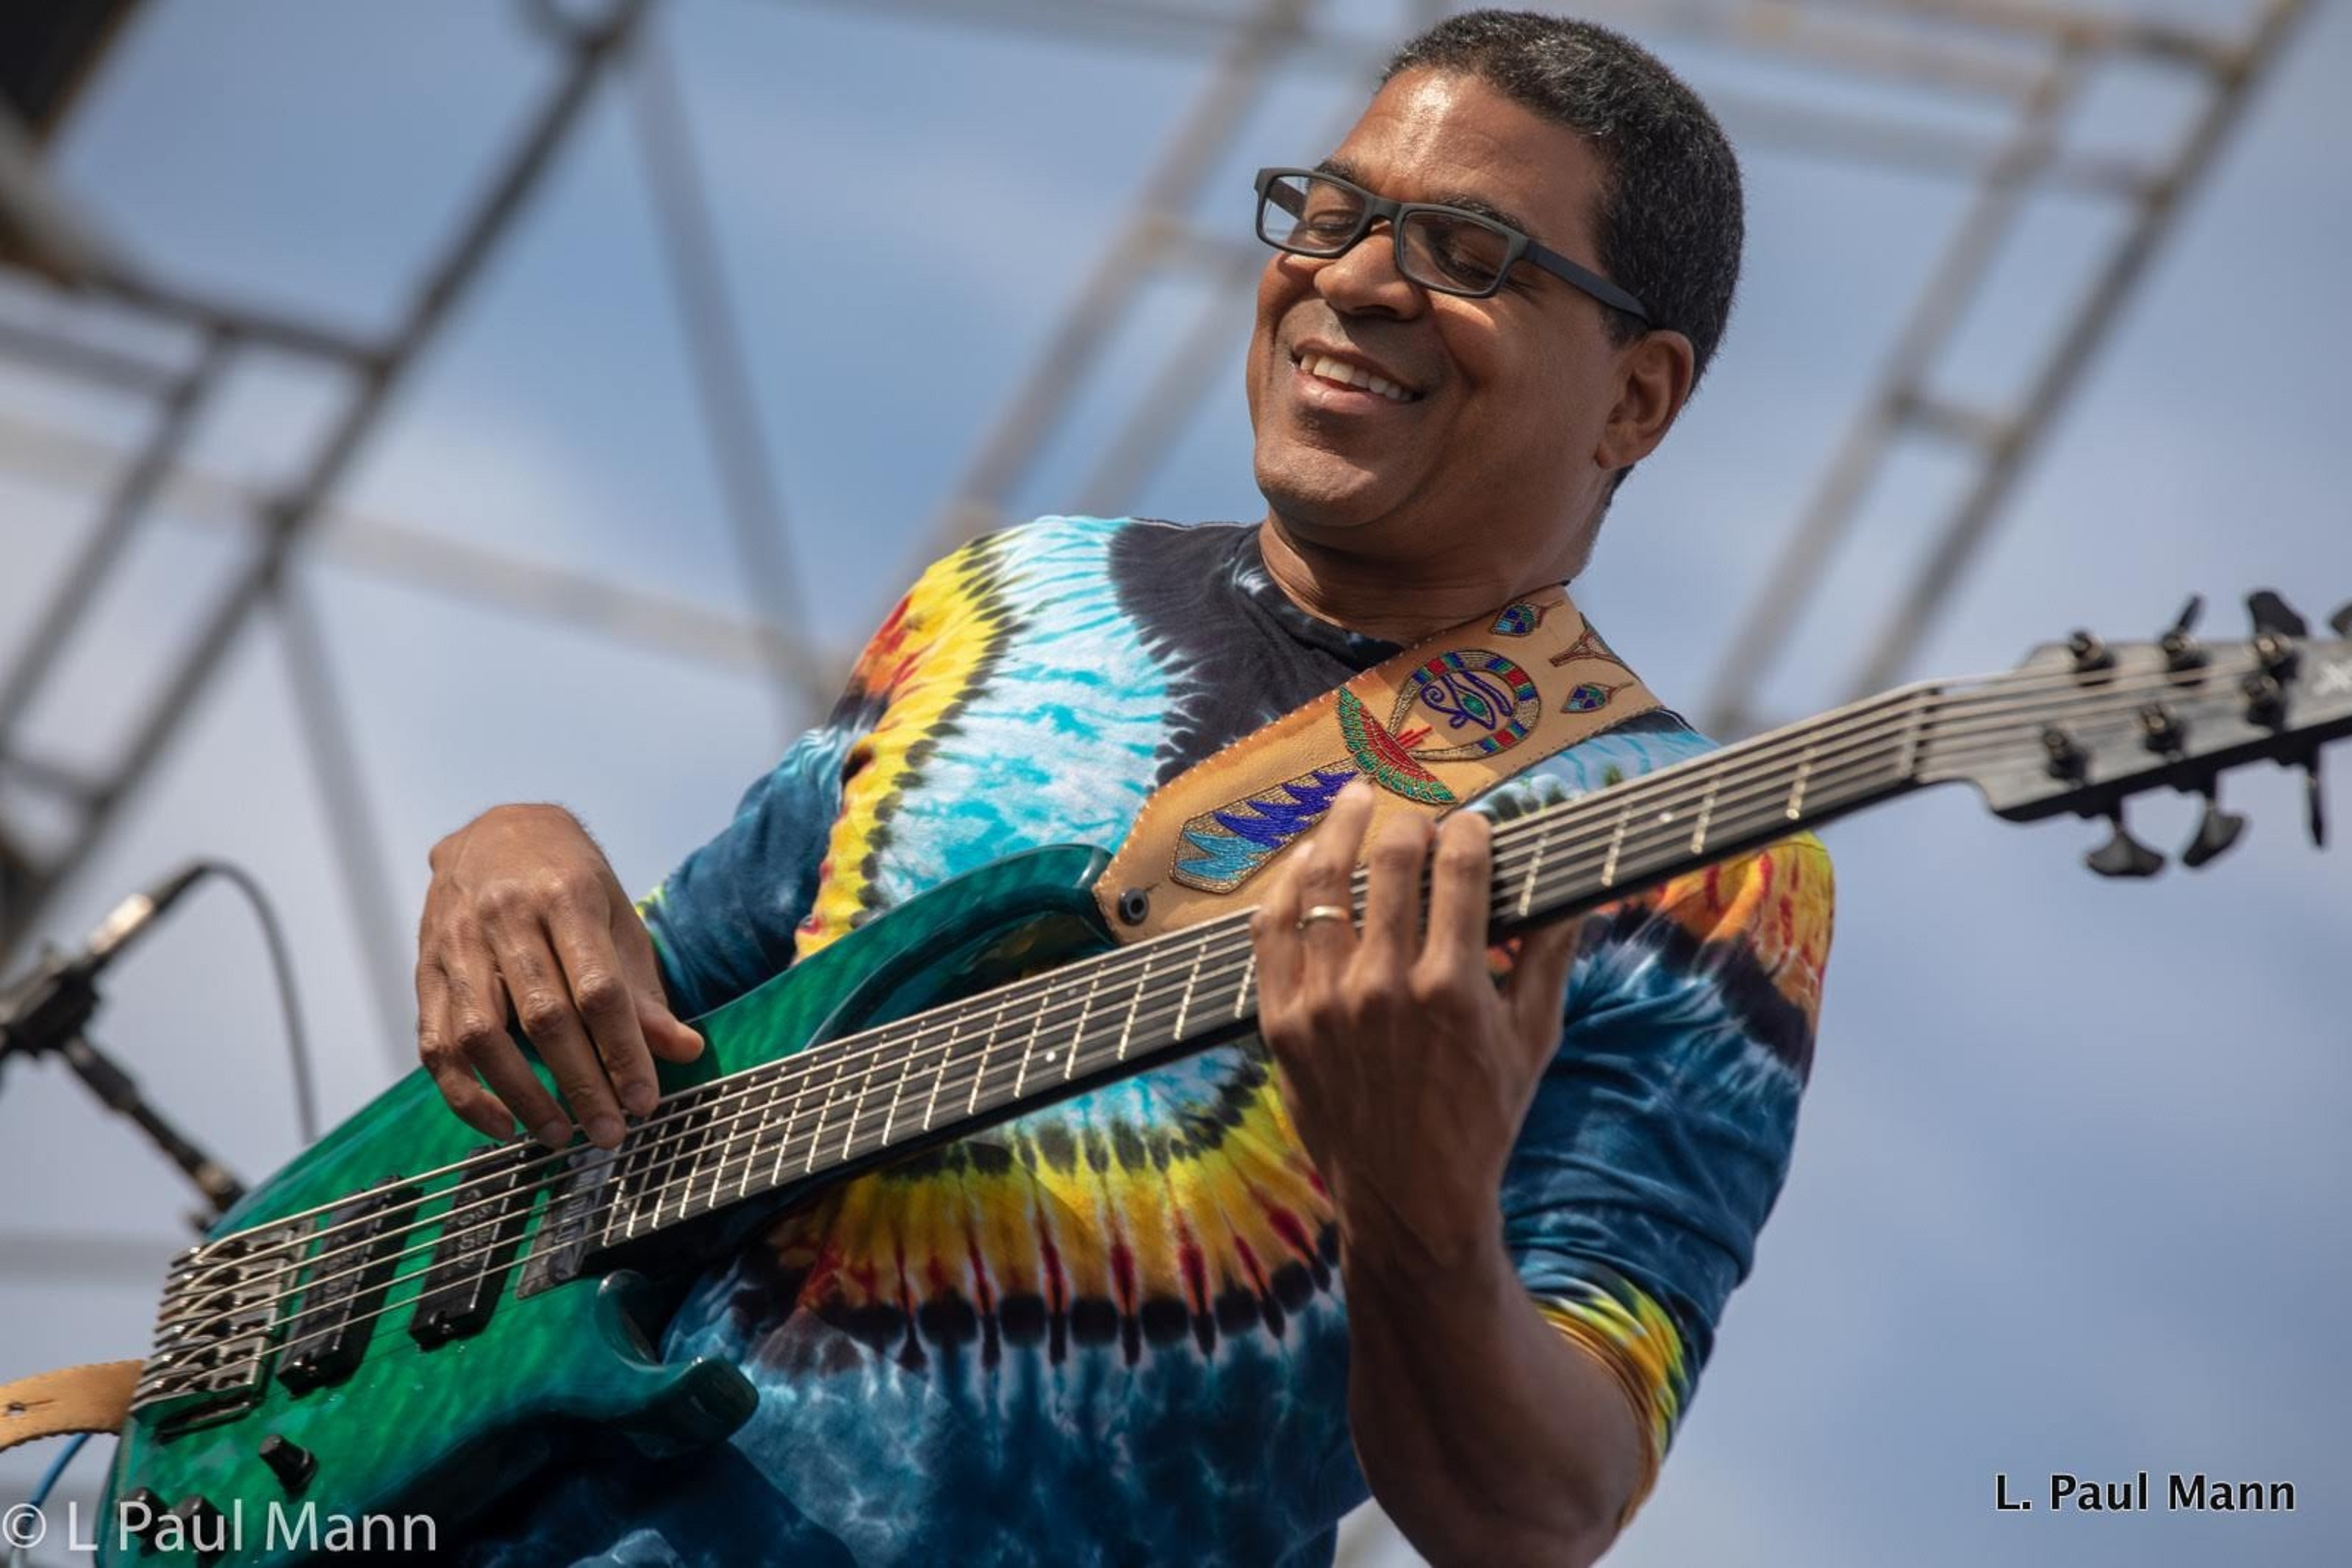 Oteil and Friends will once again play Skull & Roses